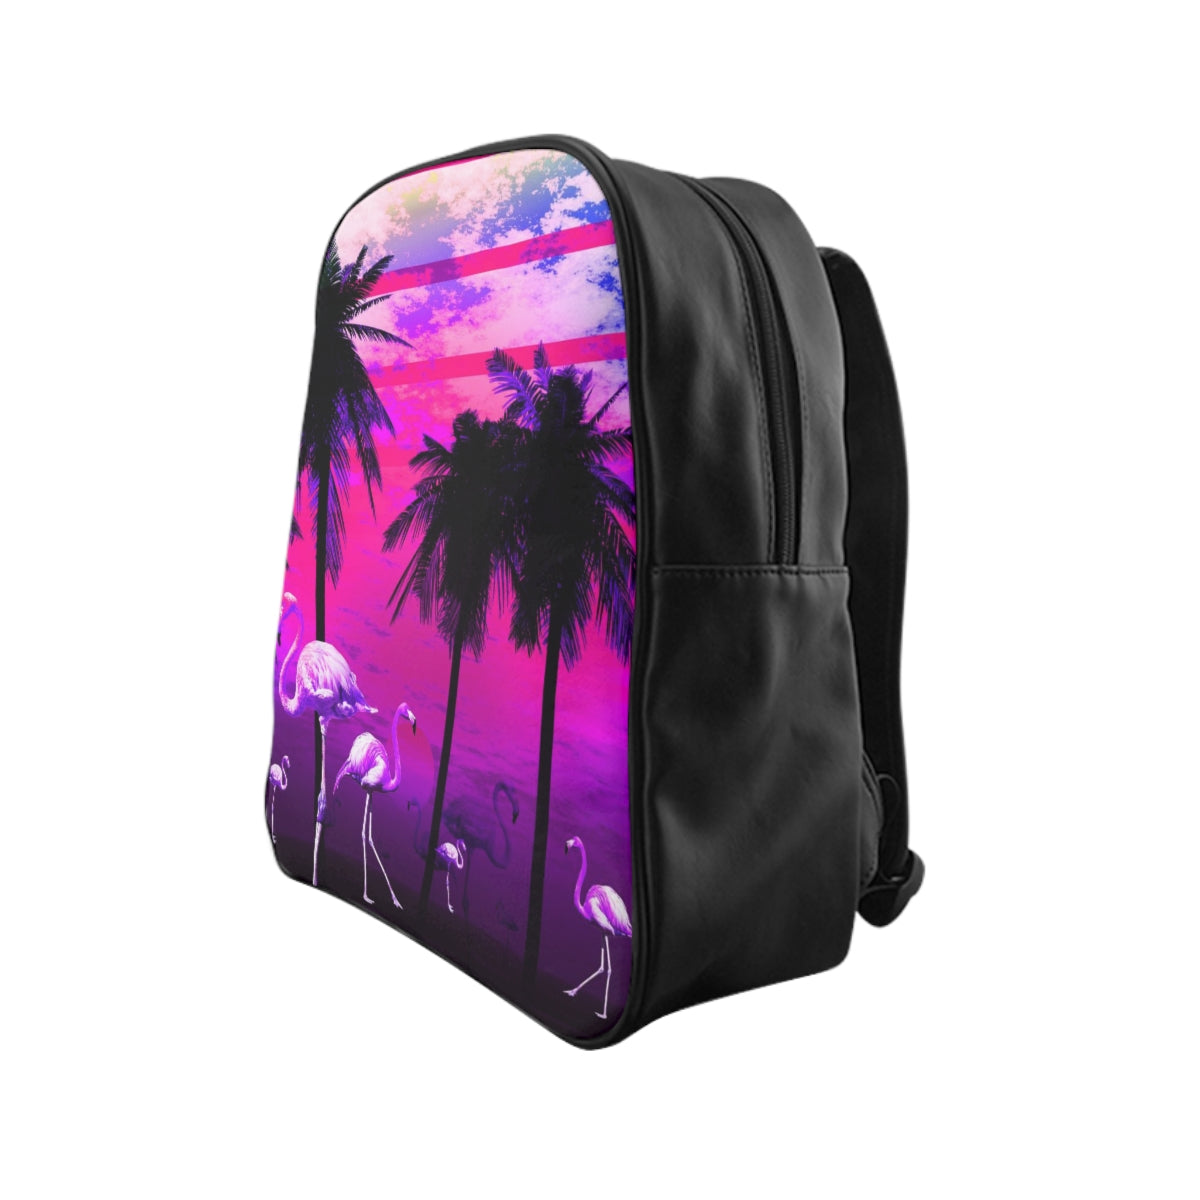 Getrott Pink Beach Flamingos Sunset Backpack Carry-On Travel Check Luggage 4-Wheel Spinner Suitcase Bag Multiple Colors and Sizes